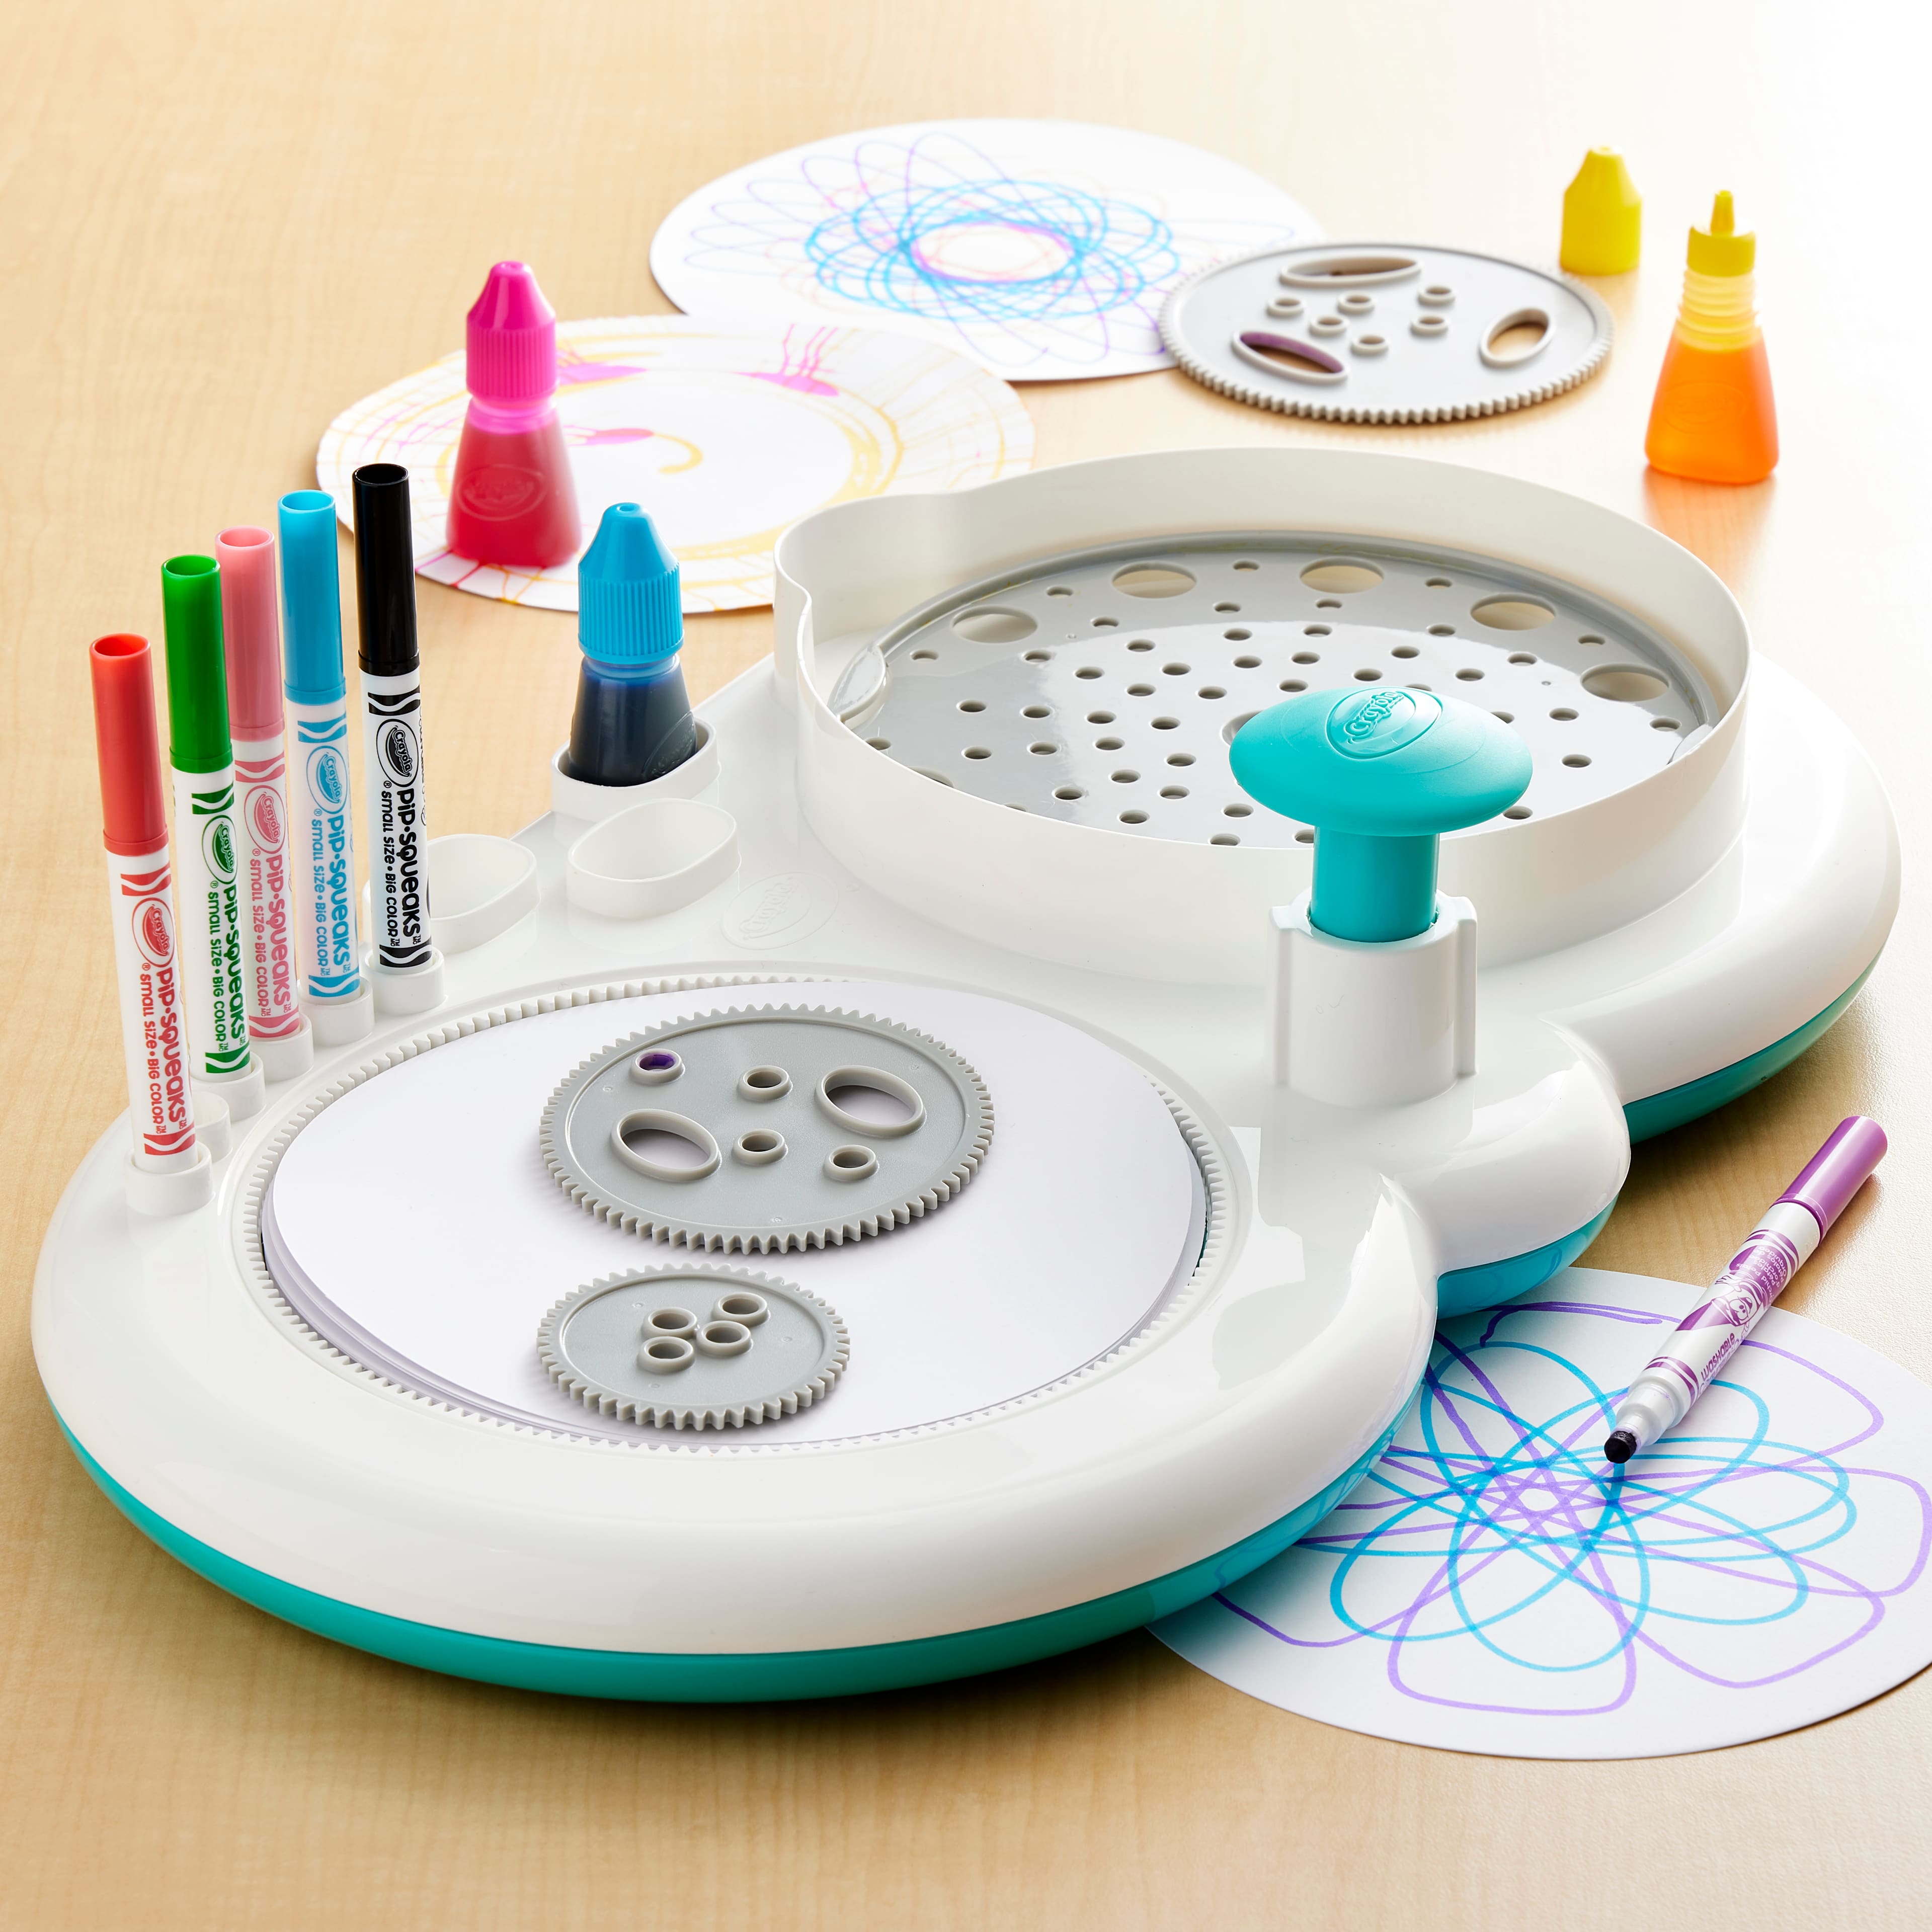 Swirling Paint Station Includes Paints 2 in 1 Doodle and Spin Paper & Crayons 